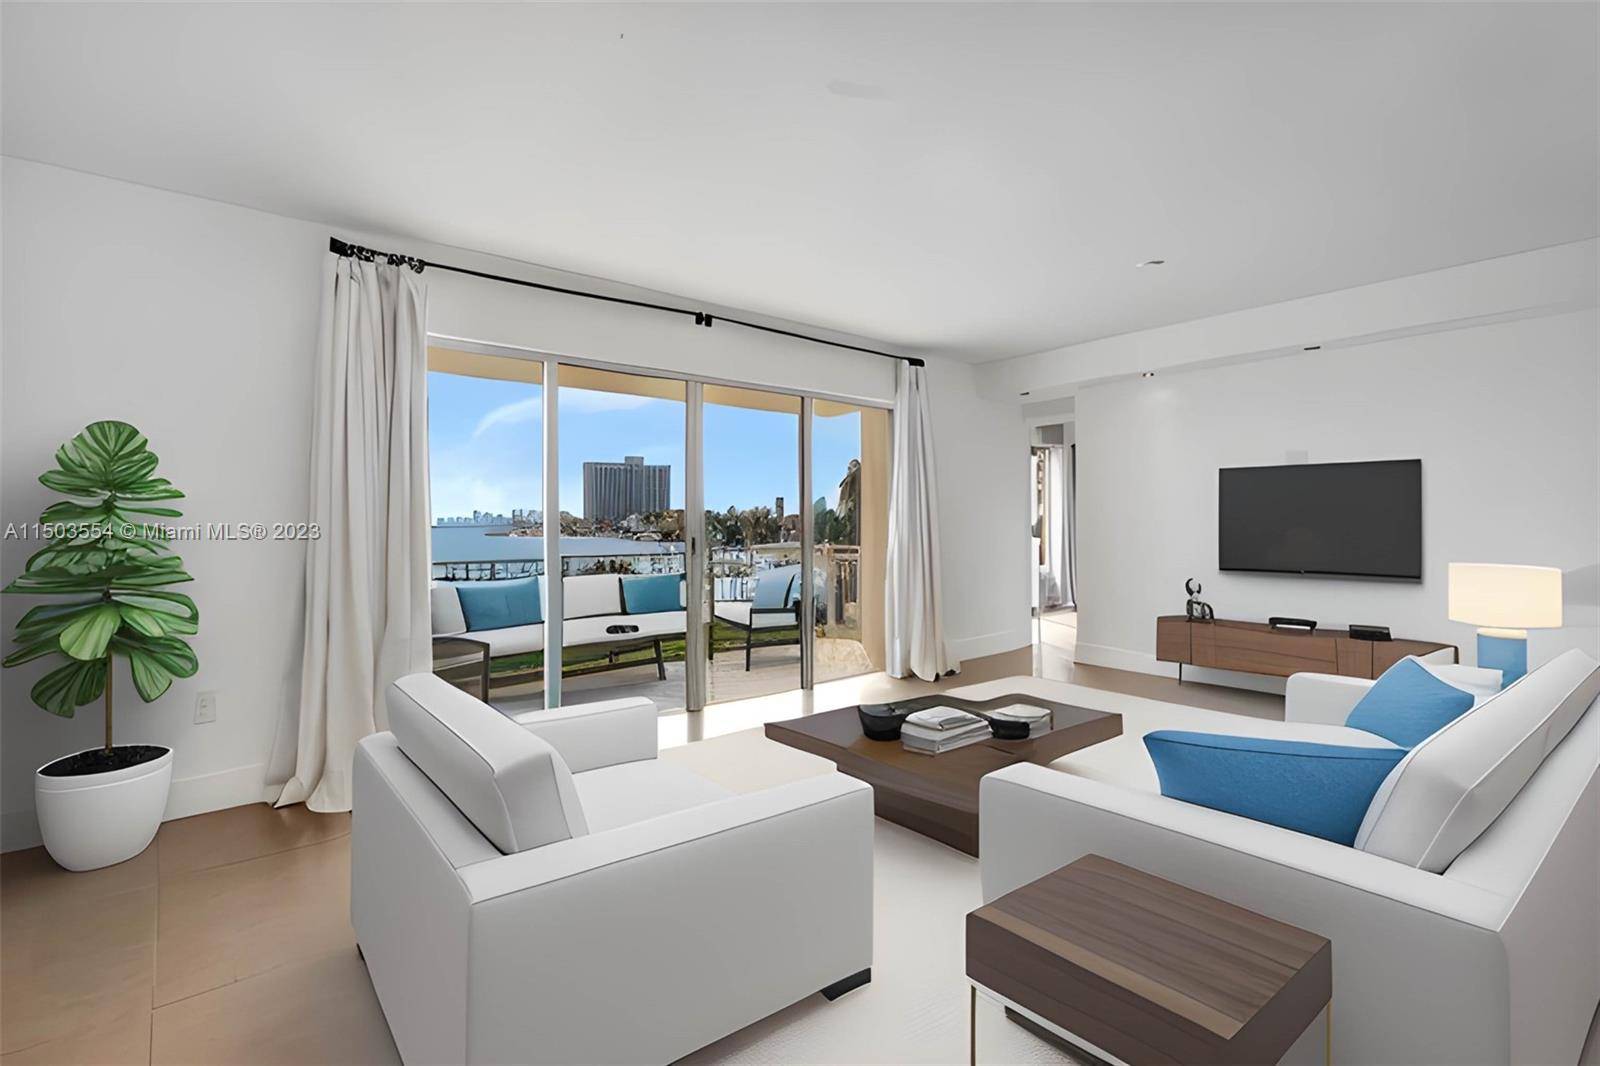 Expansive and uninterrupted vistas of sparkling Biscayne Bay, Miami Beach, and Downtown Miami can be enjoyed from every room of this elegant unit.